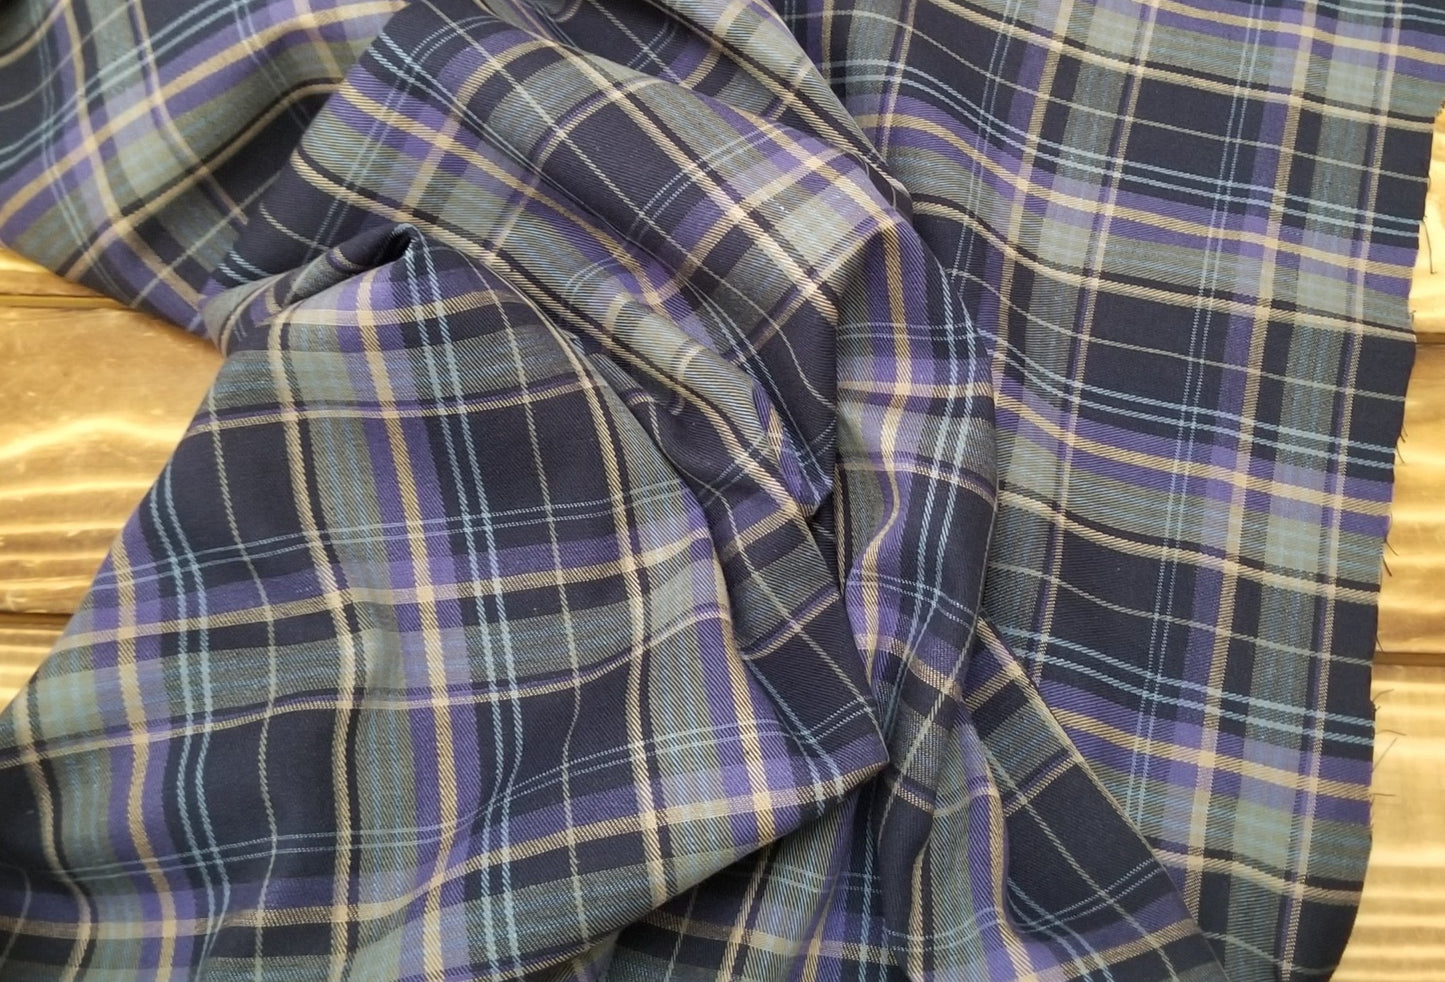 Designer Deadstock Cotton Shirting Yarn Dyed Purple and Navy Plaid Woven- by the yard